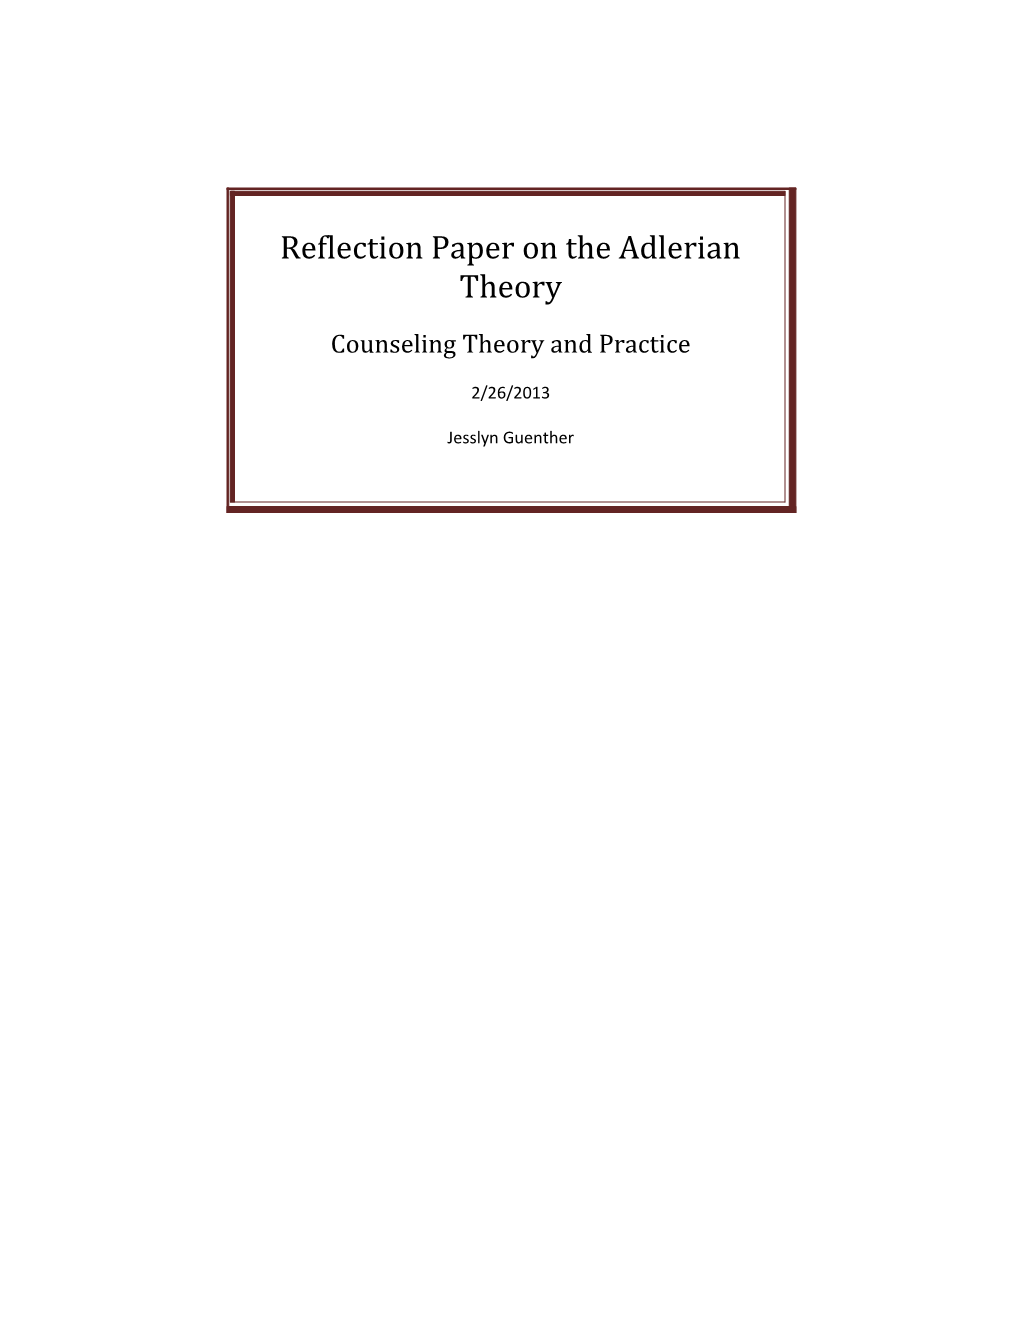 Reflection Paper on the Adlerian Theory